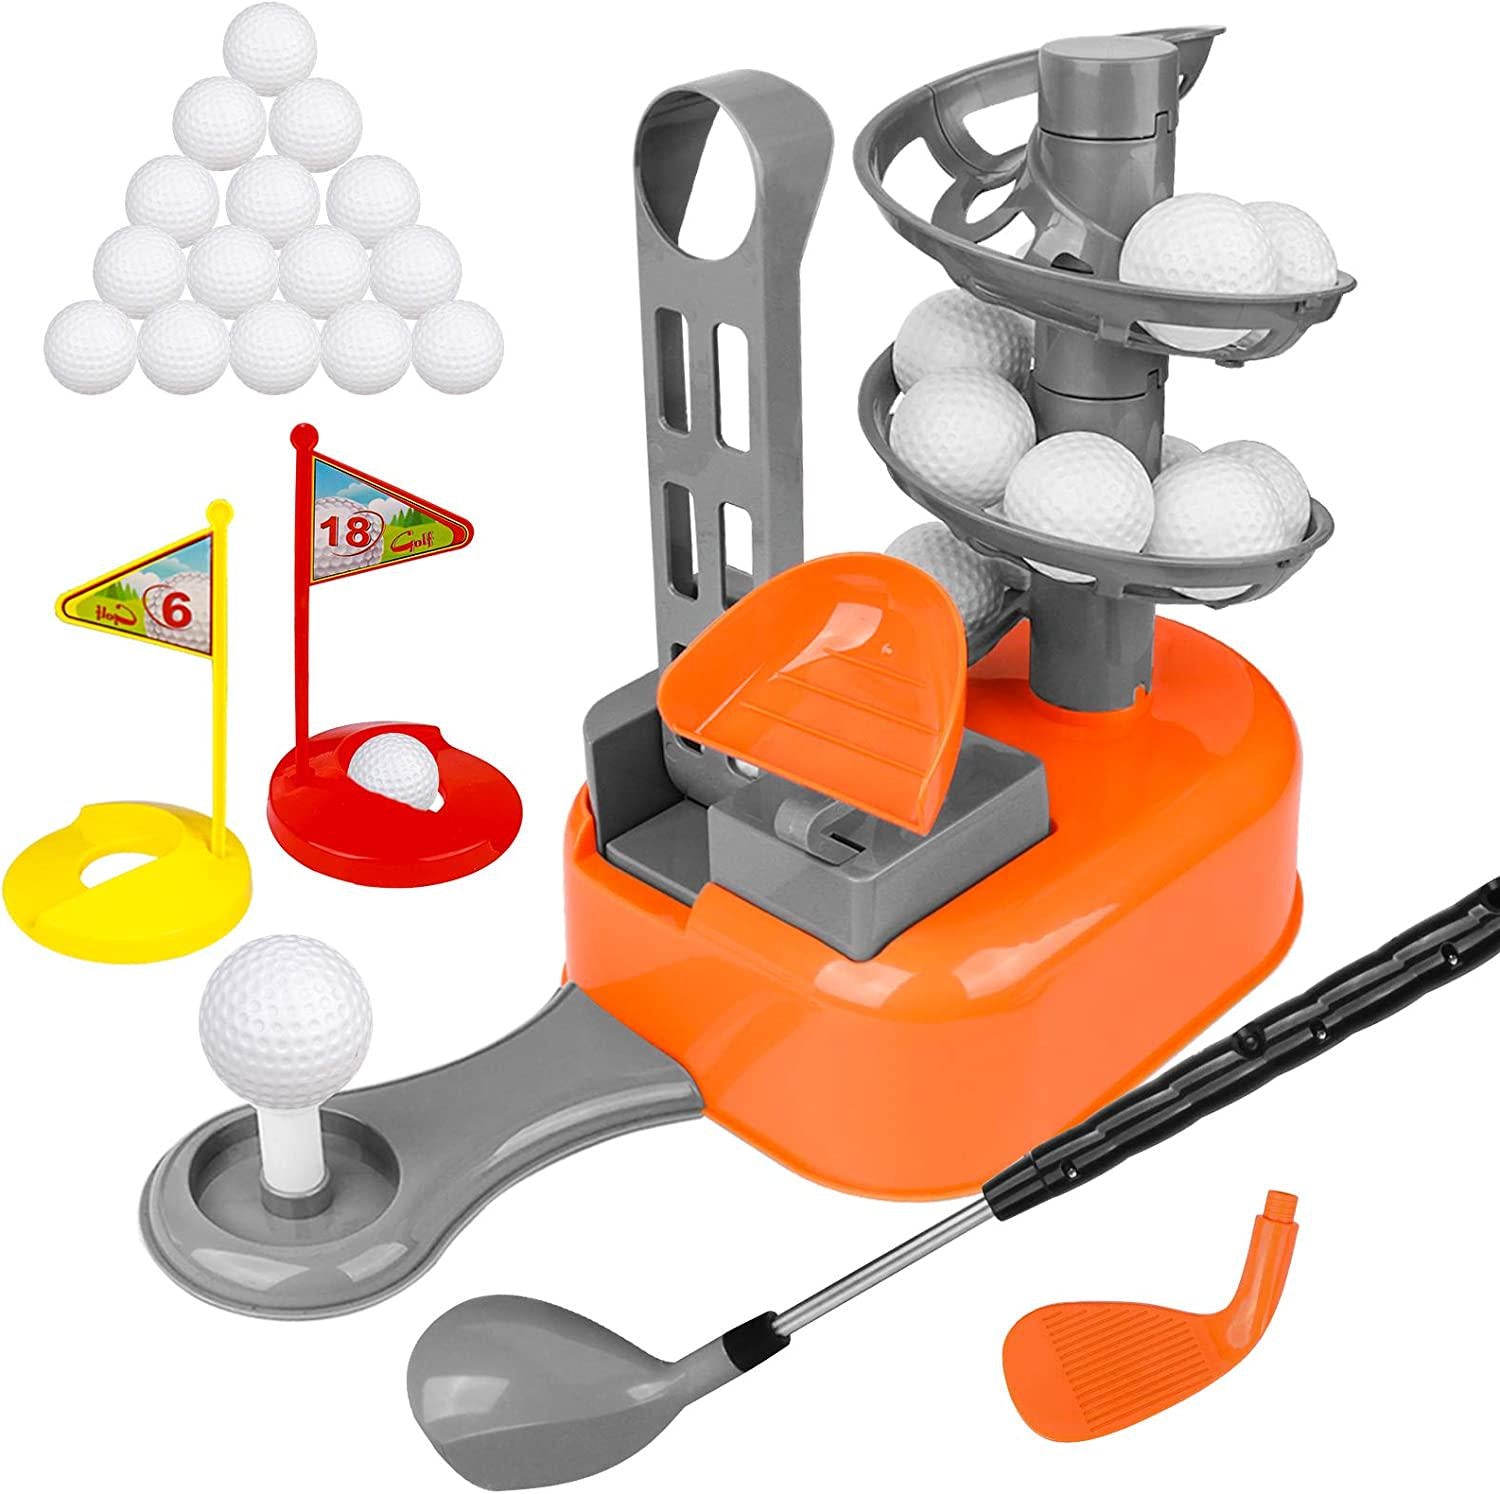 LOYO, Loyo Kids Golf Clubs Set Toddler-Golf-Clubs Outdoor Golf Game for Kids, Golf Balls Play Set with Training Golf Balls and Clubs Equipment, Gift for Preschool Boys Age 3, 4, 5, 6, 7, 8